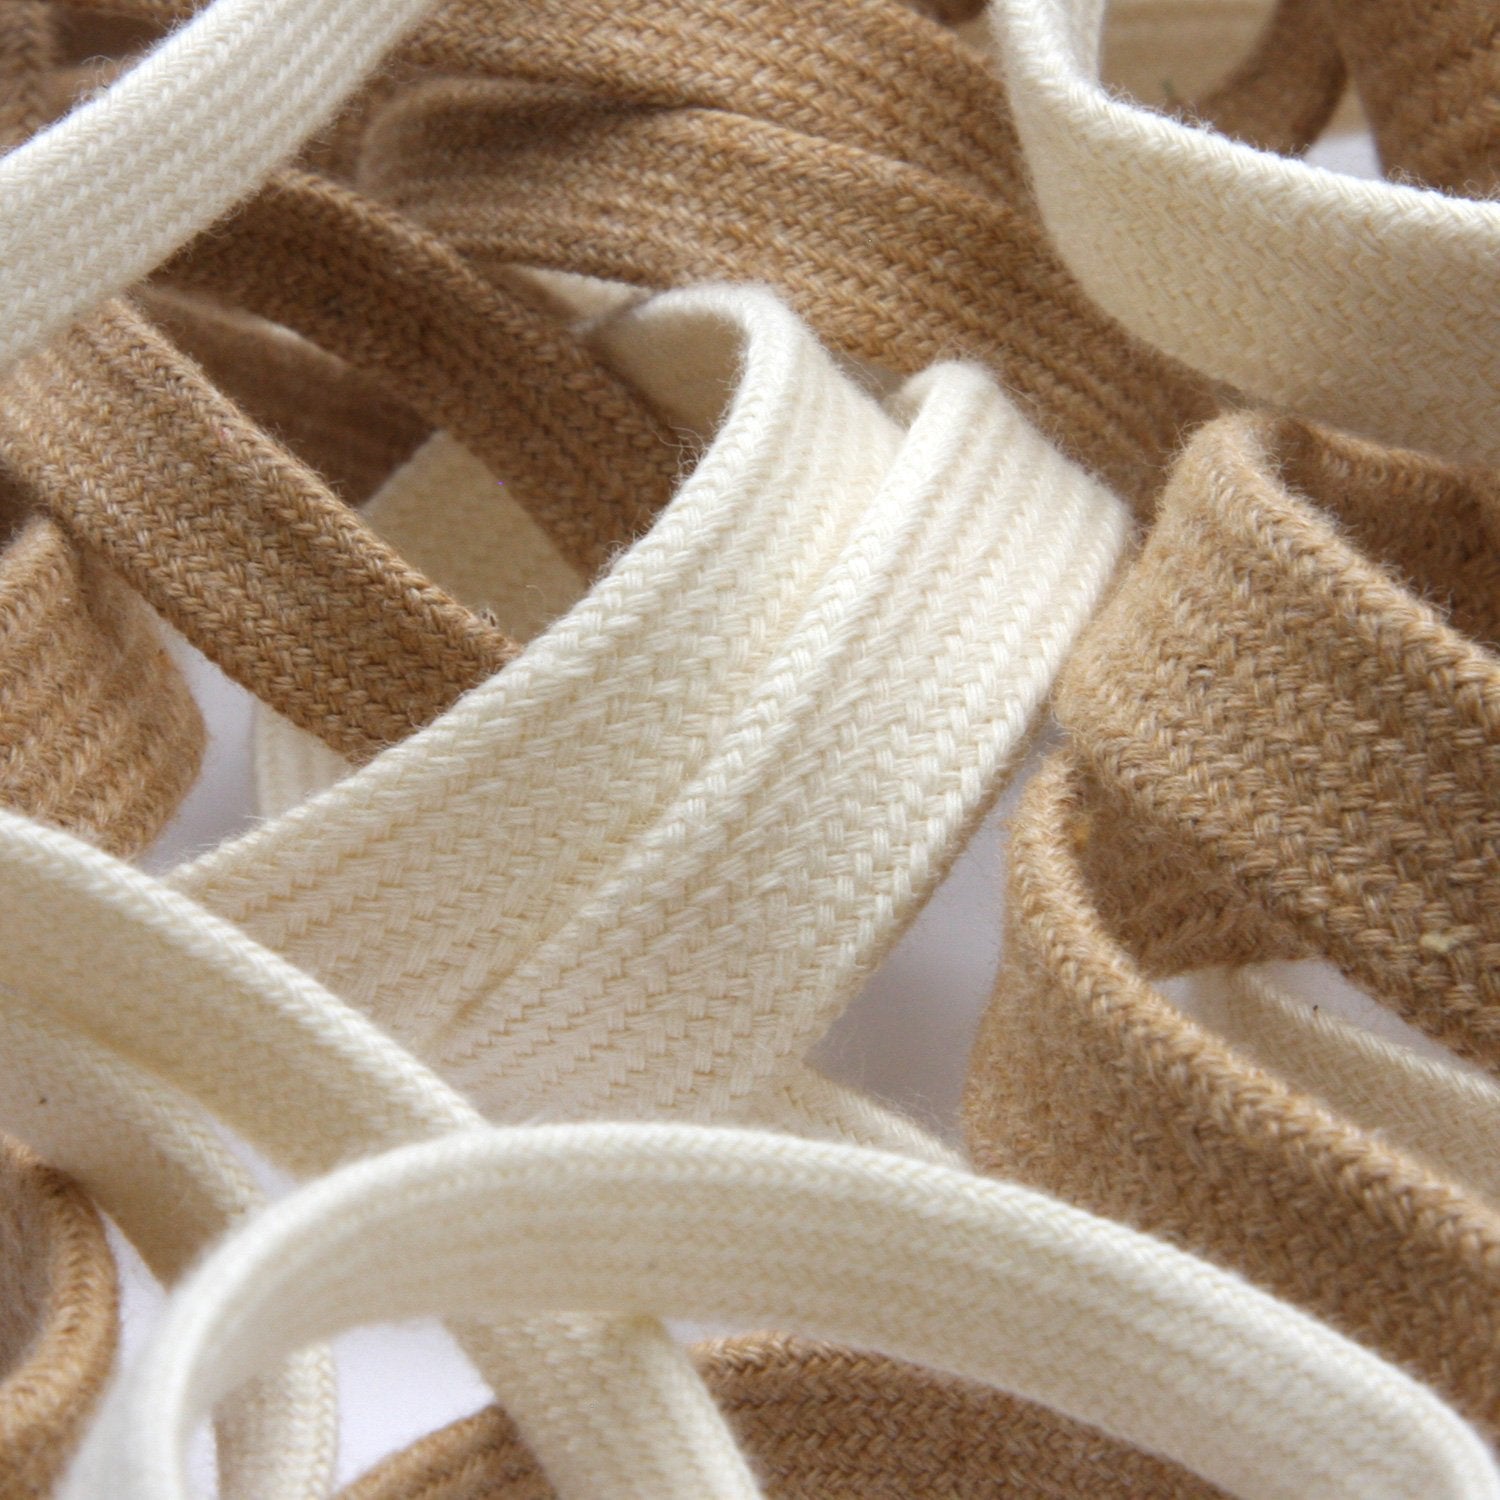 FUJIYAMA RIBBON [Wholesale] Organic Cotton Spindle Cord approx.11mm 50 Meters Roll